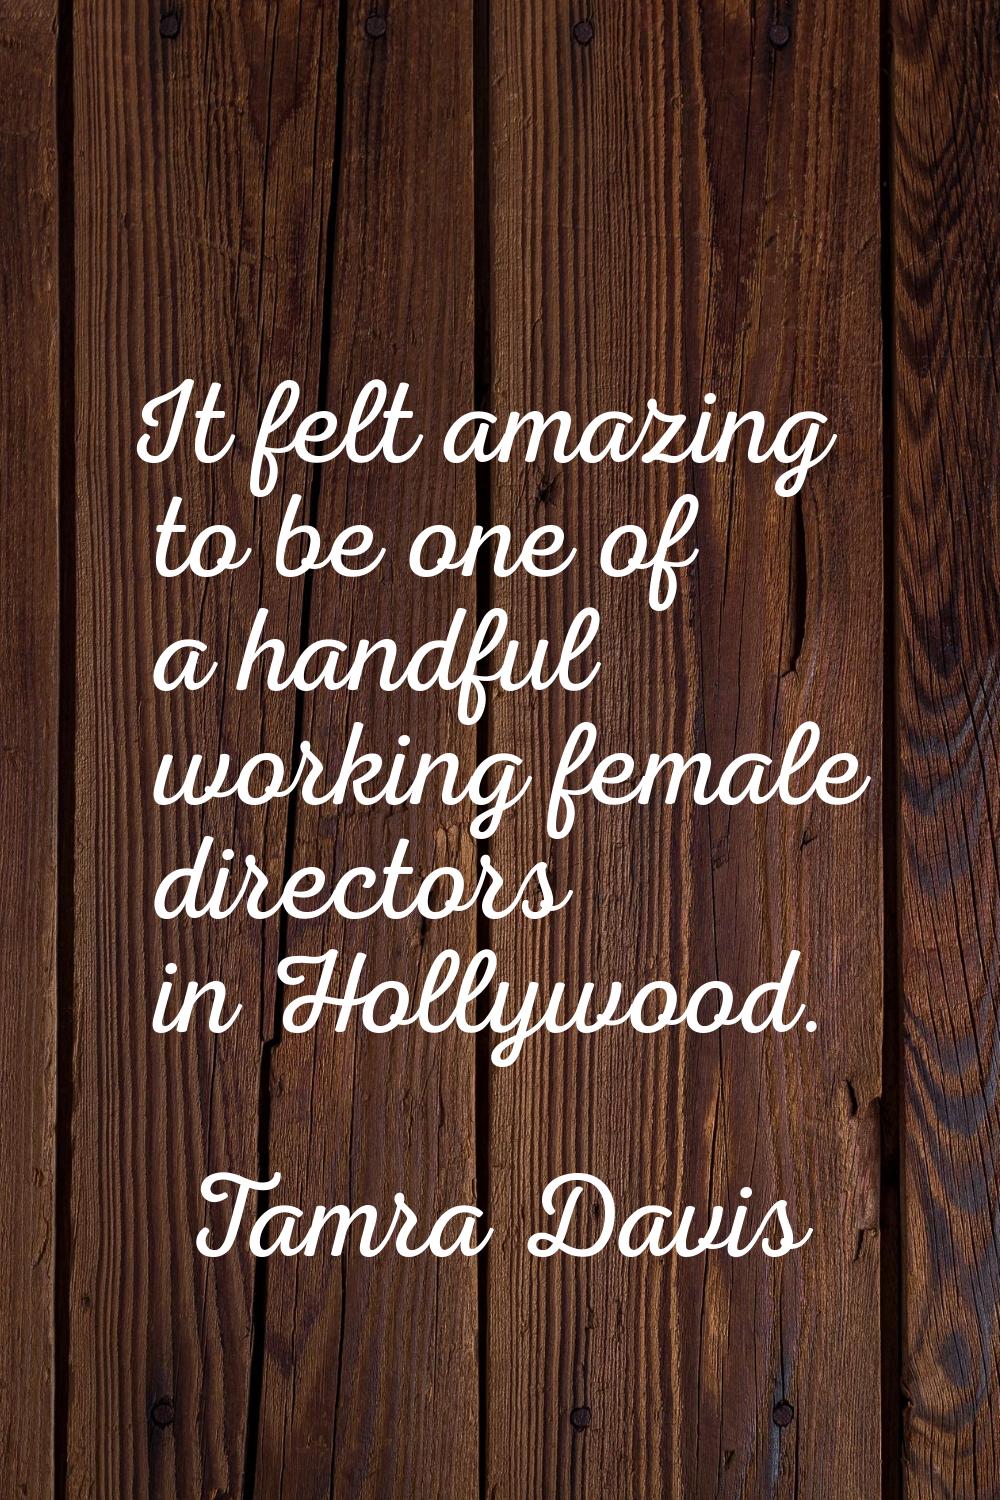 It felt amazing to be one of a handful working female directors in Hollywood.